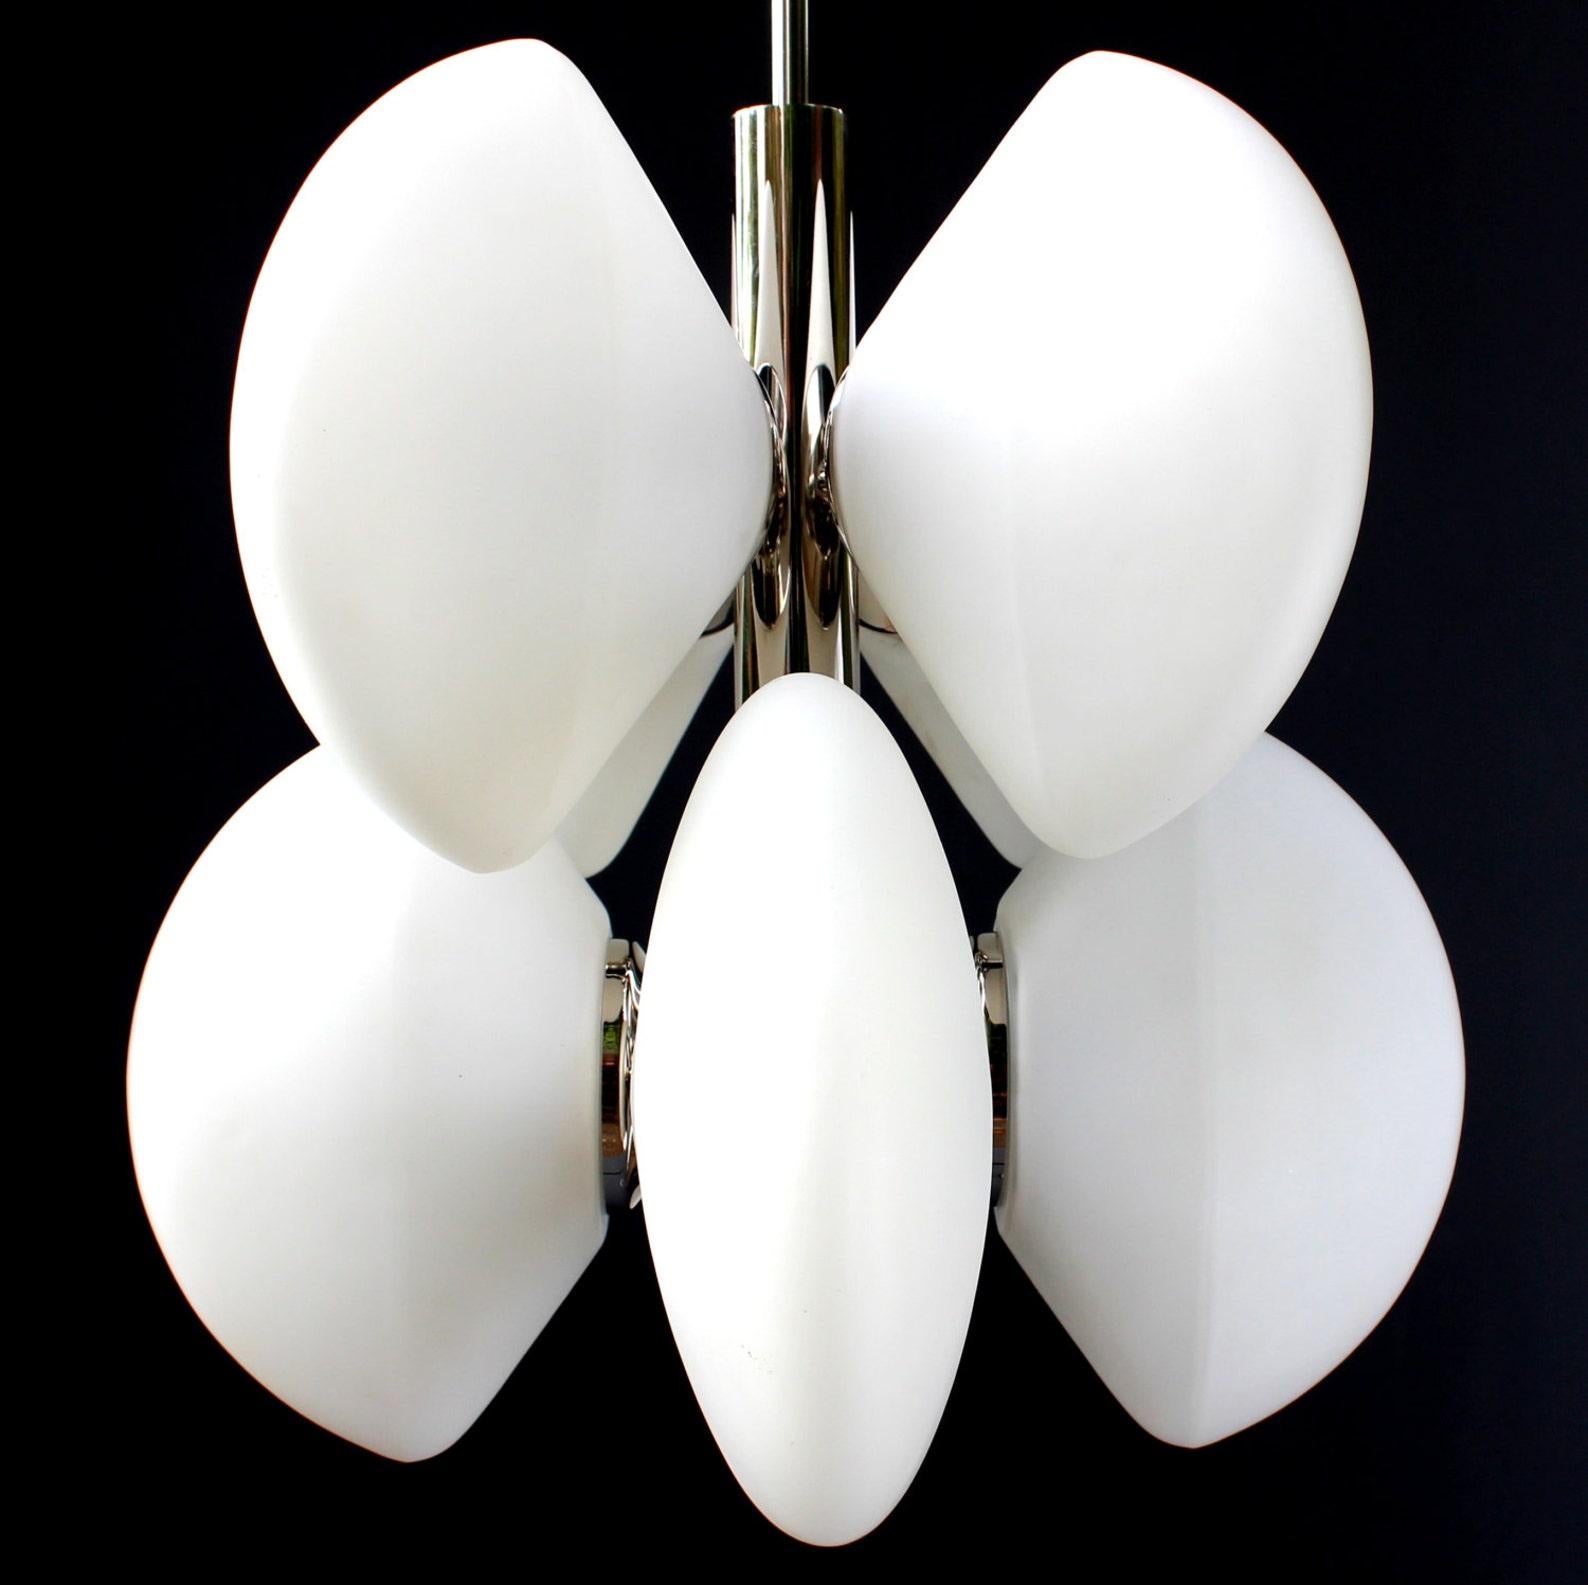 Petit organic chandelier 1970s with 8 (+1 for reserve) oval opal glass globes by Kaiser Germany.

Measures: diameter 13